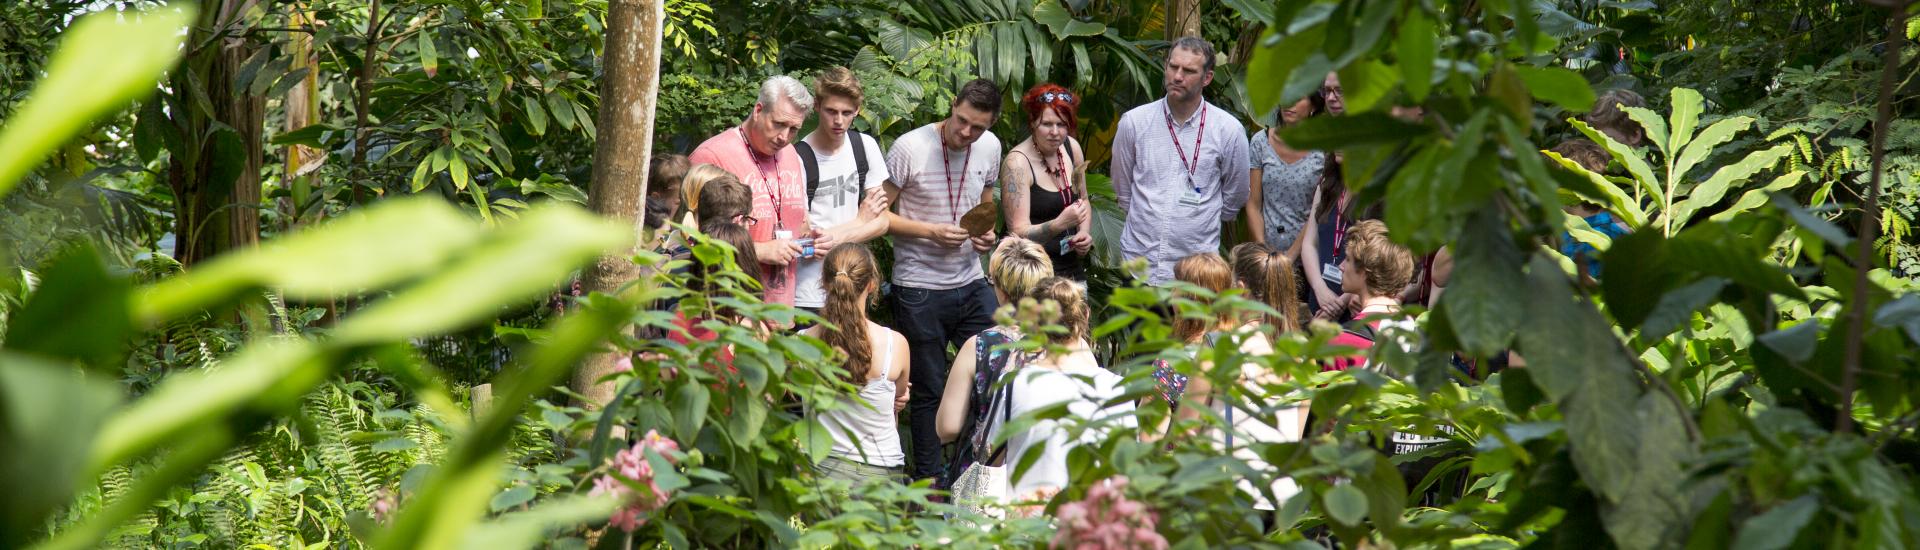 A school trip standing in a group talking in the middle of the Eden rainforest biome